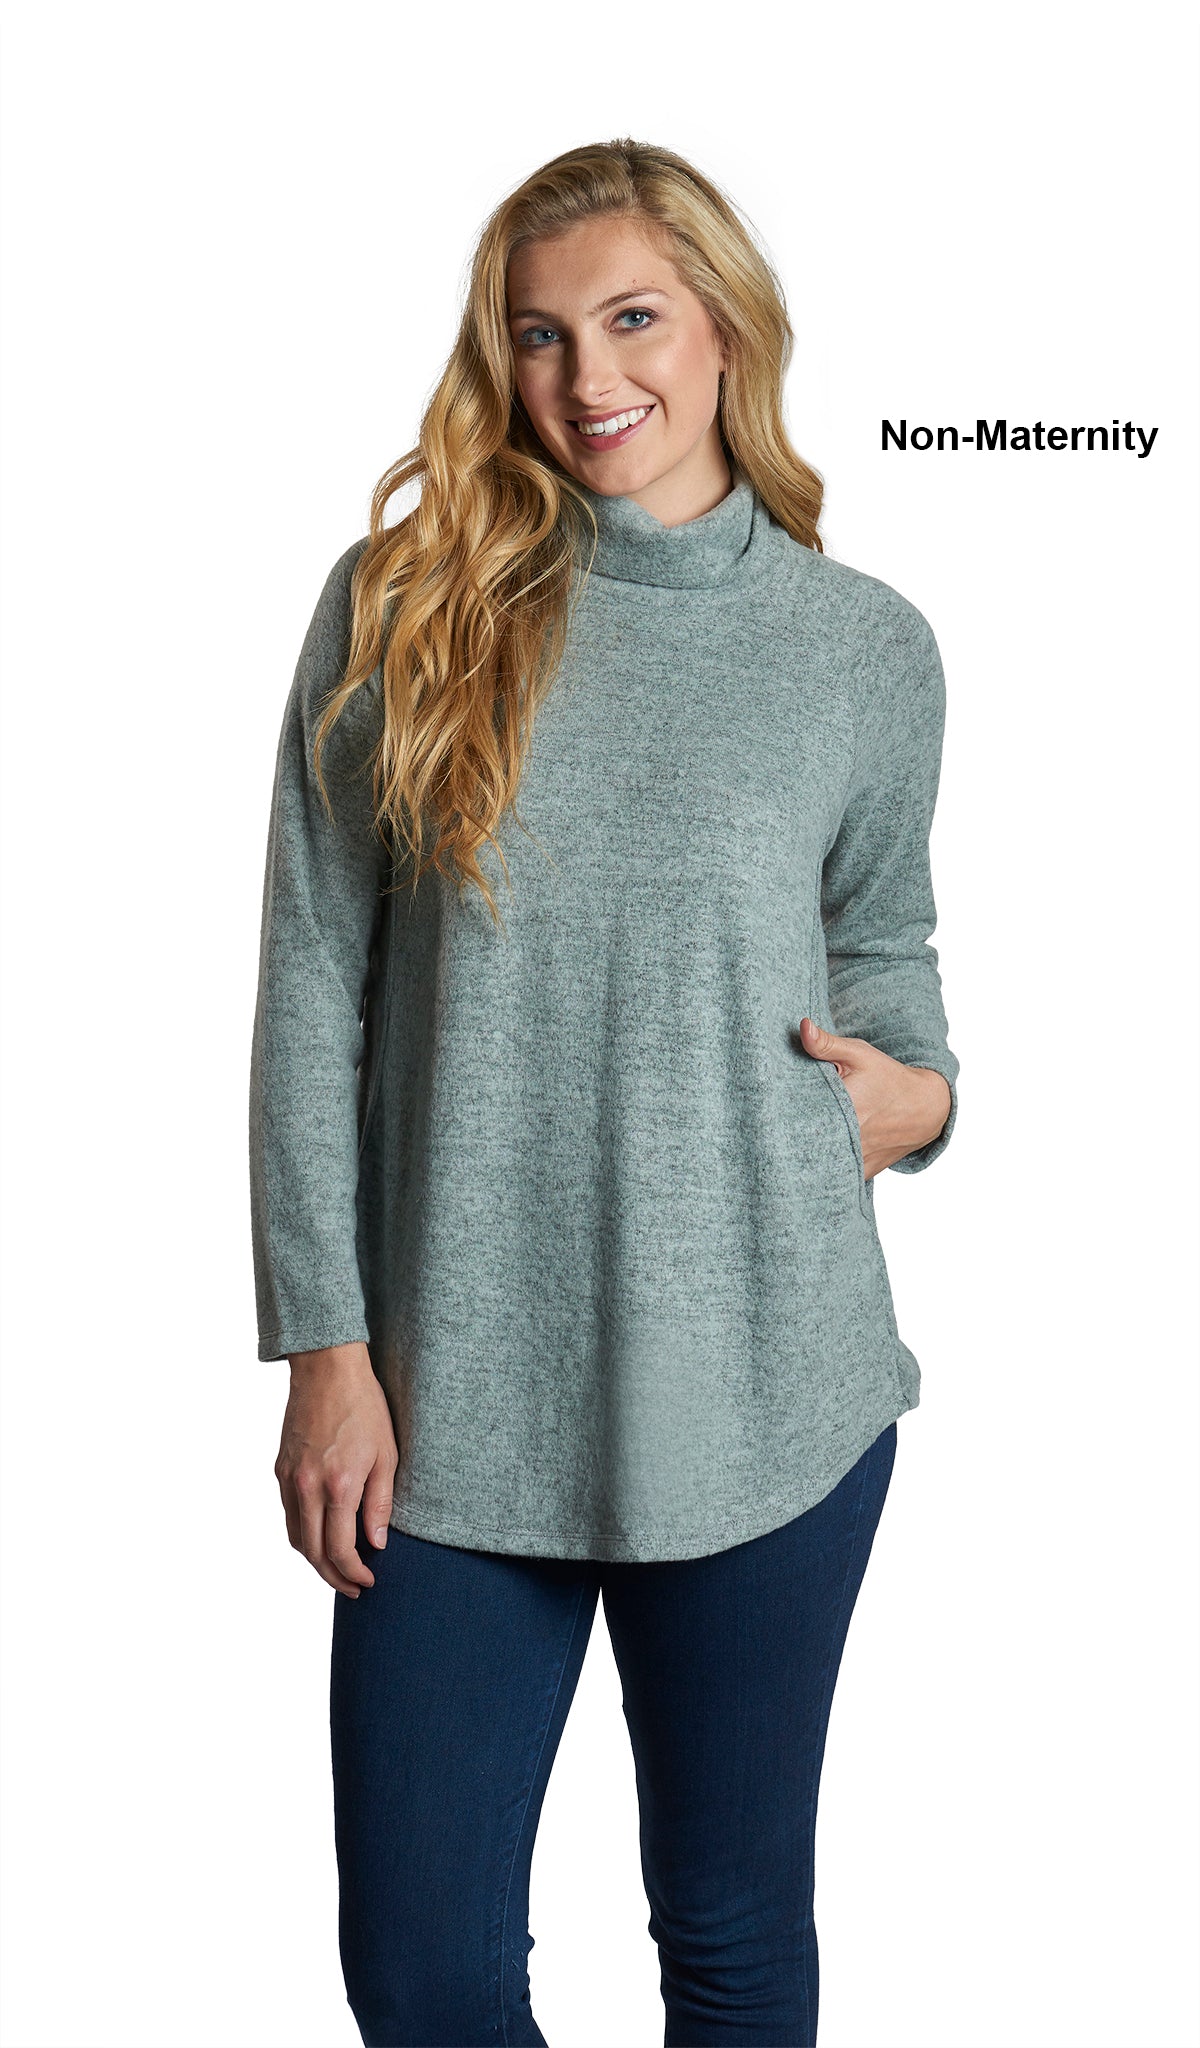 Dusty Sage Teresa Sweater. Woman wearing Teresa Sweater as non-maternity with one hand inside nursing pocket opening.